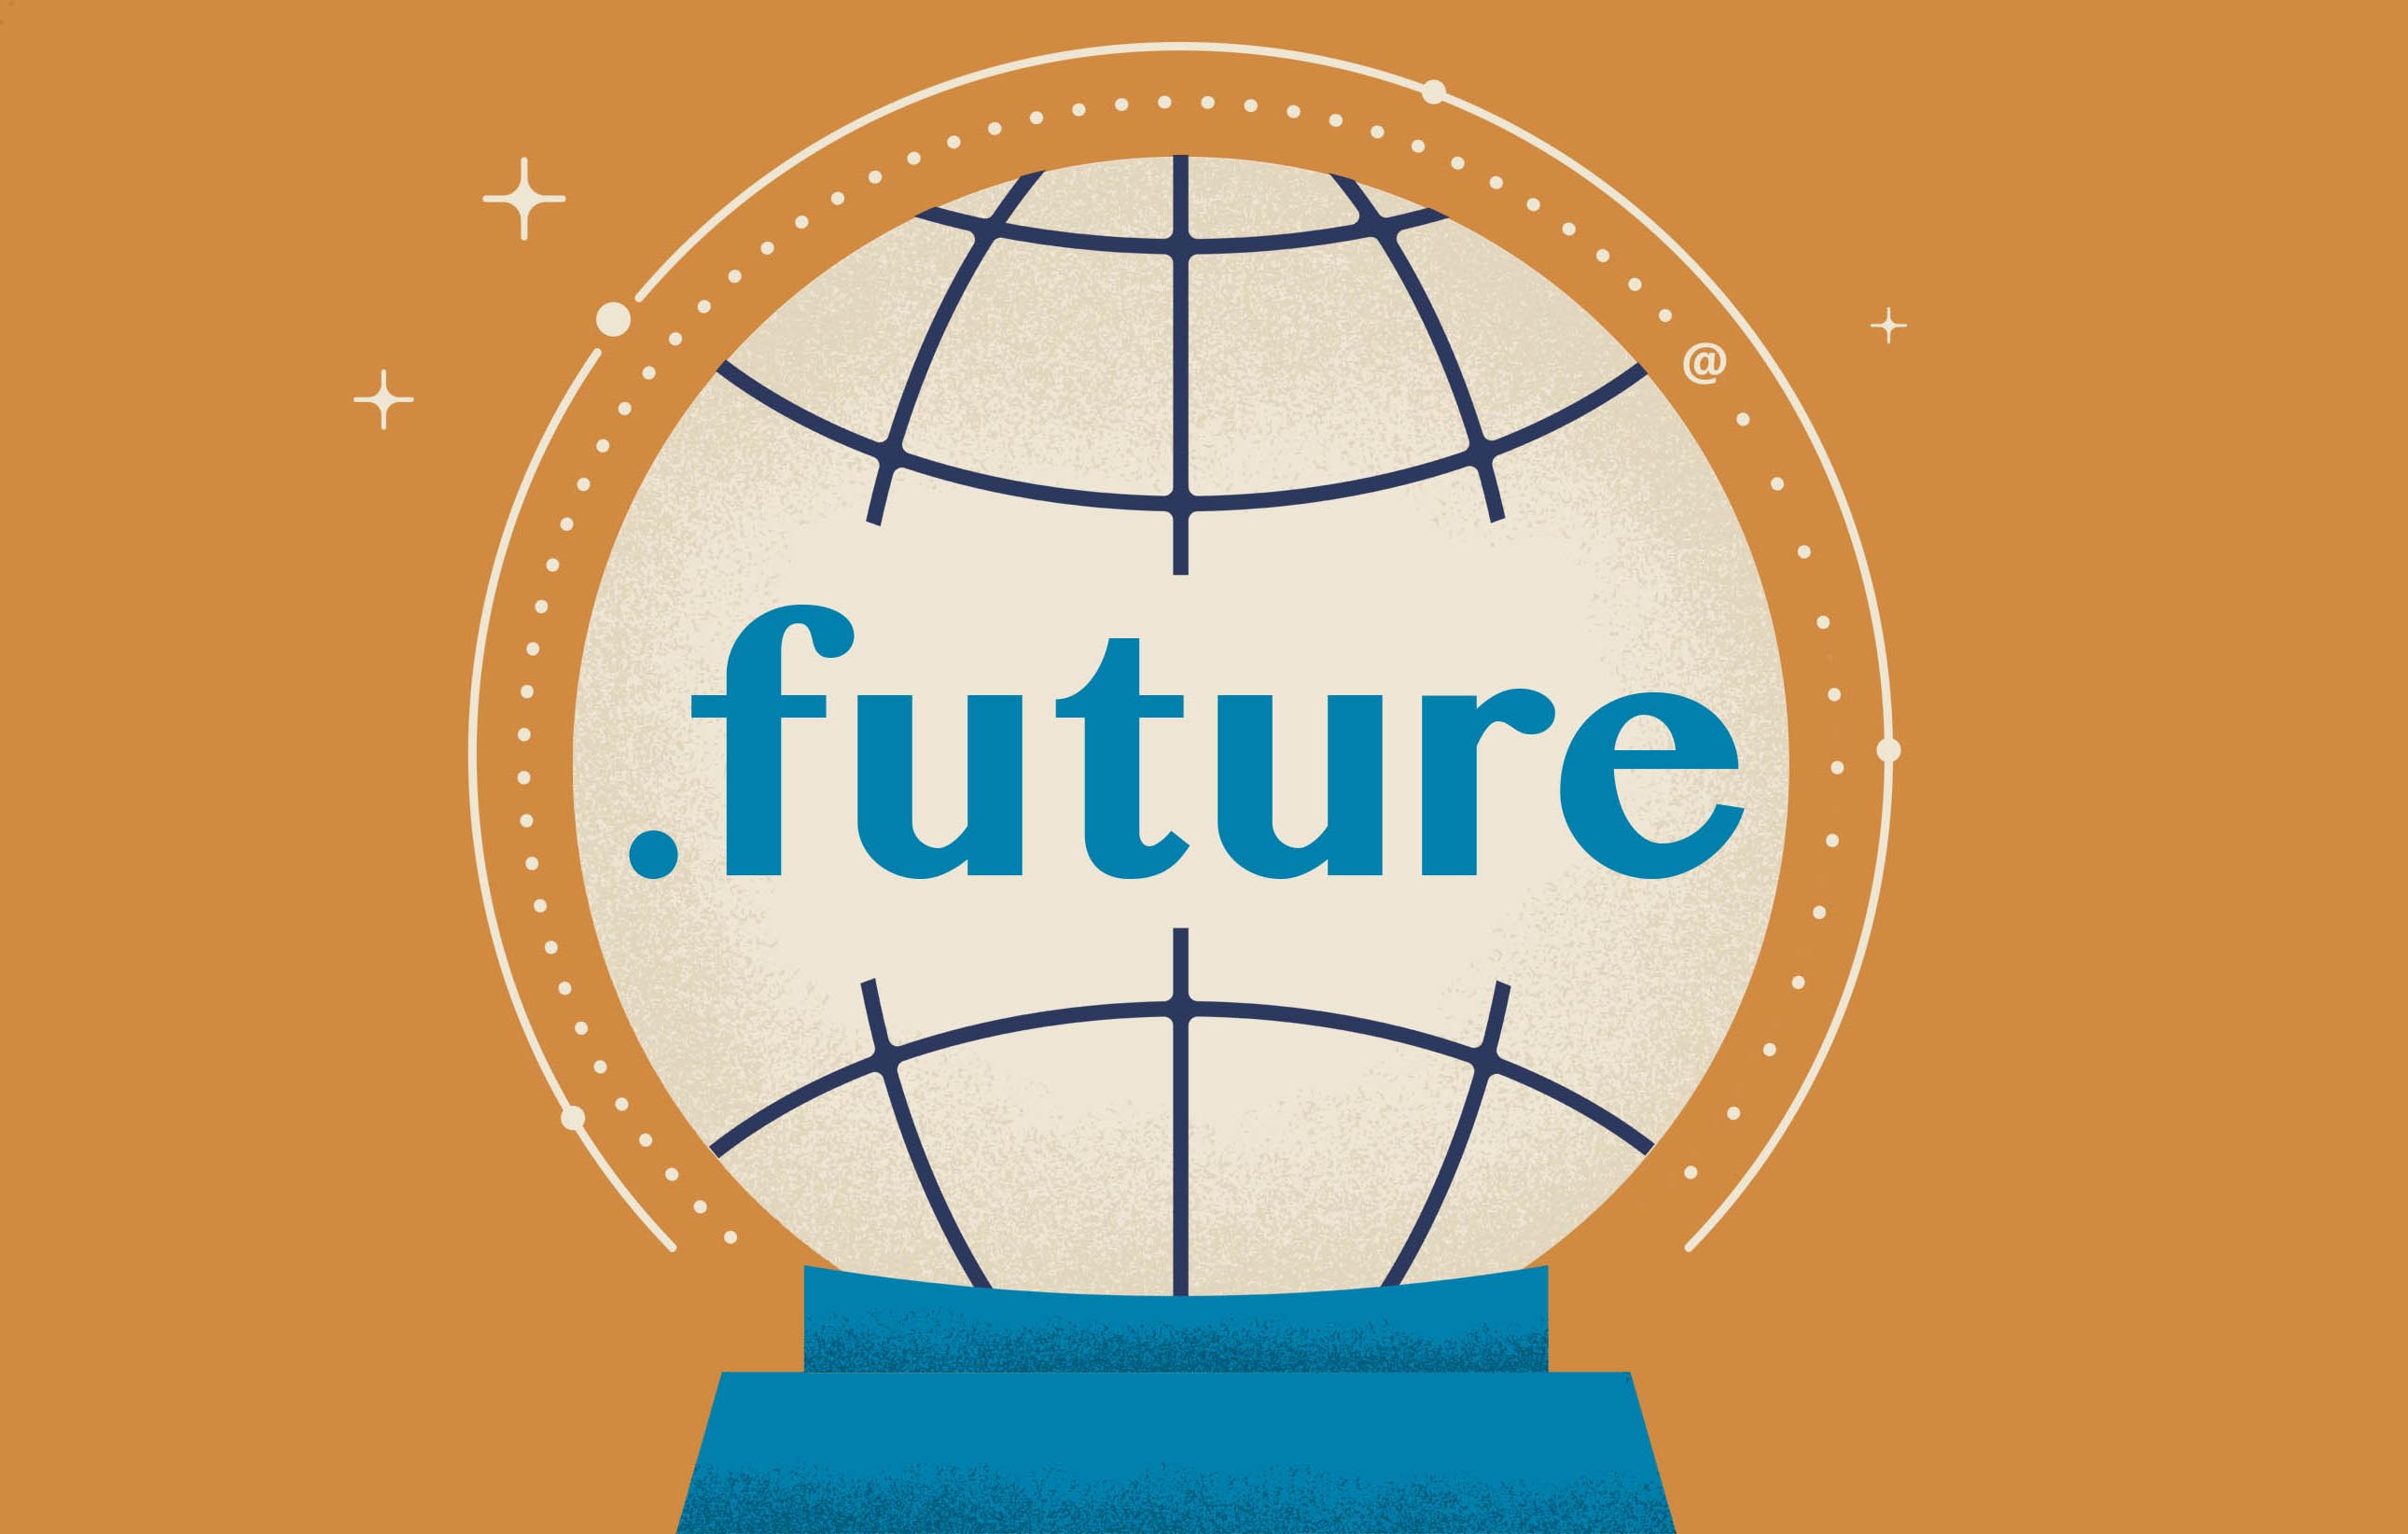 The text ".future" printed over a globe